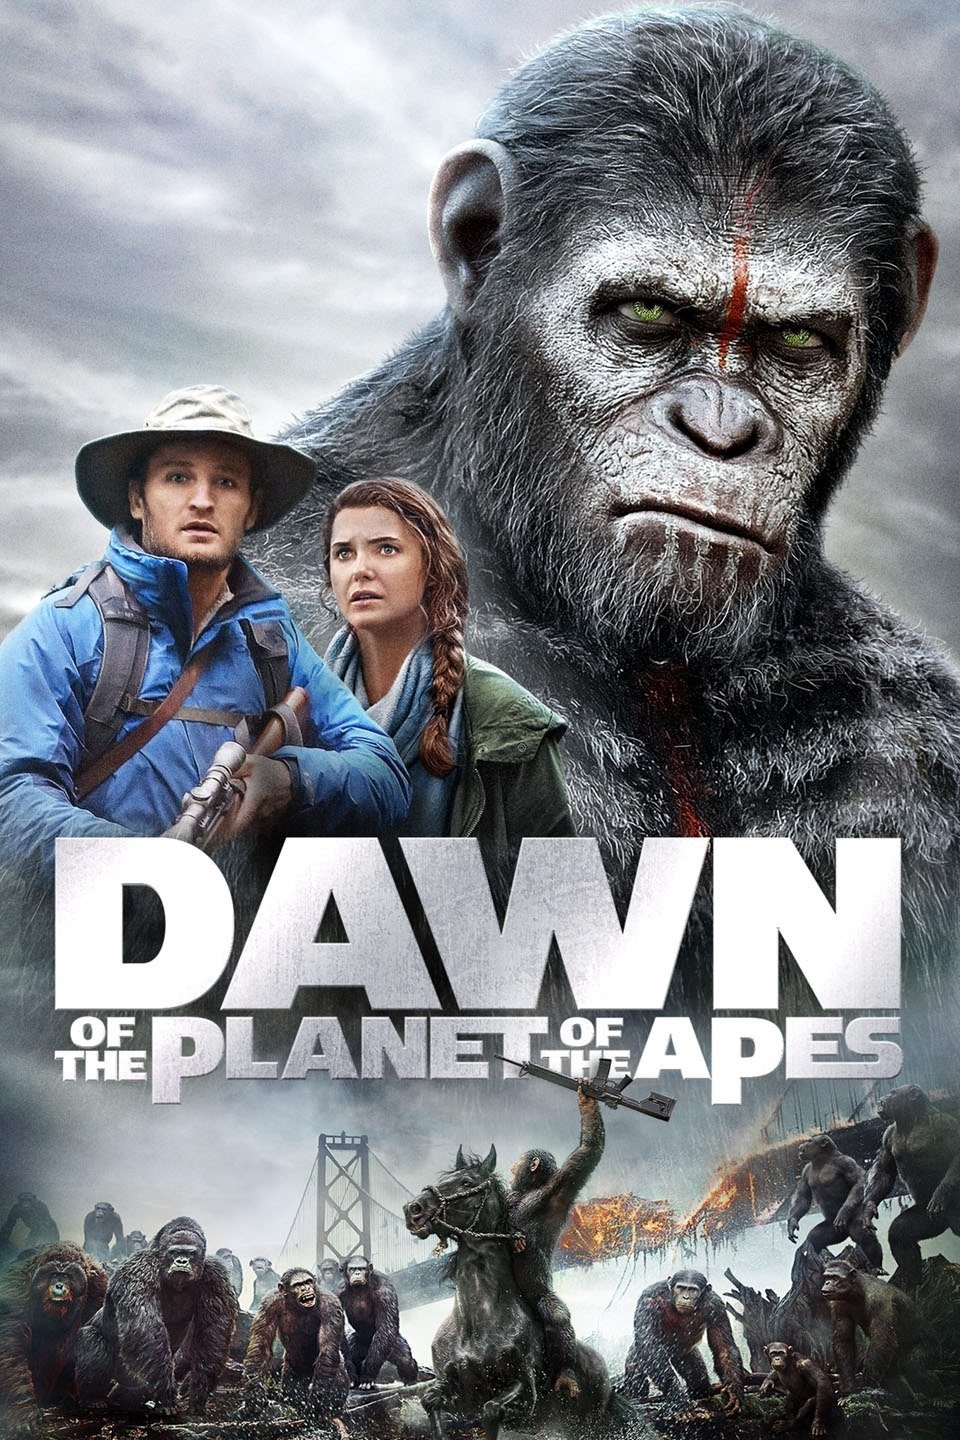 Dawn of the Planet of the Apes (2014) Dual Audio Hindi ORG 1080p 720p 480p BluRay ESubs Free Download